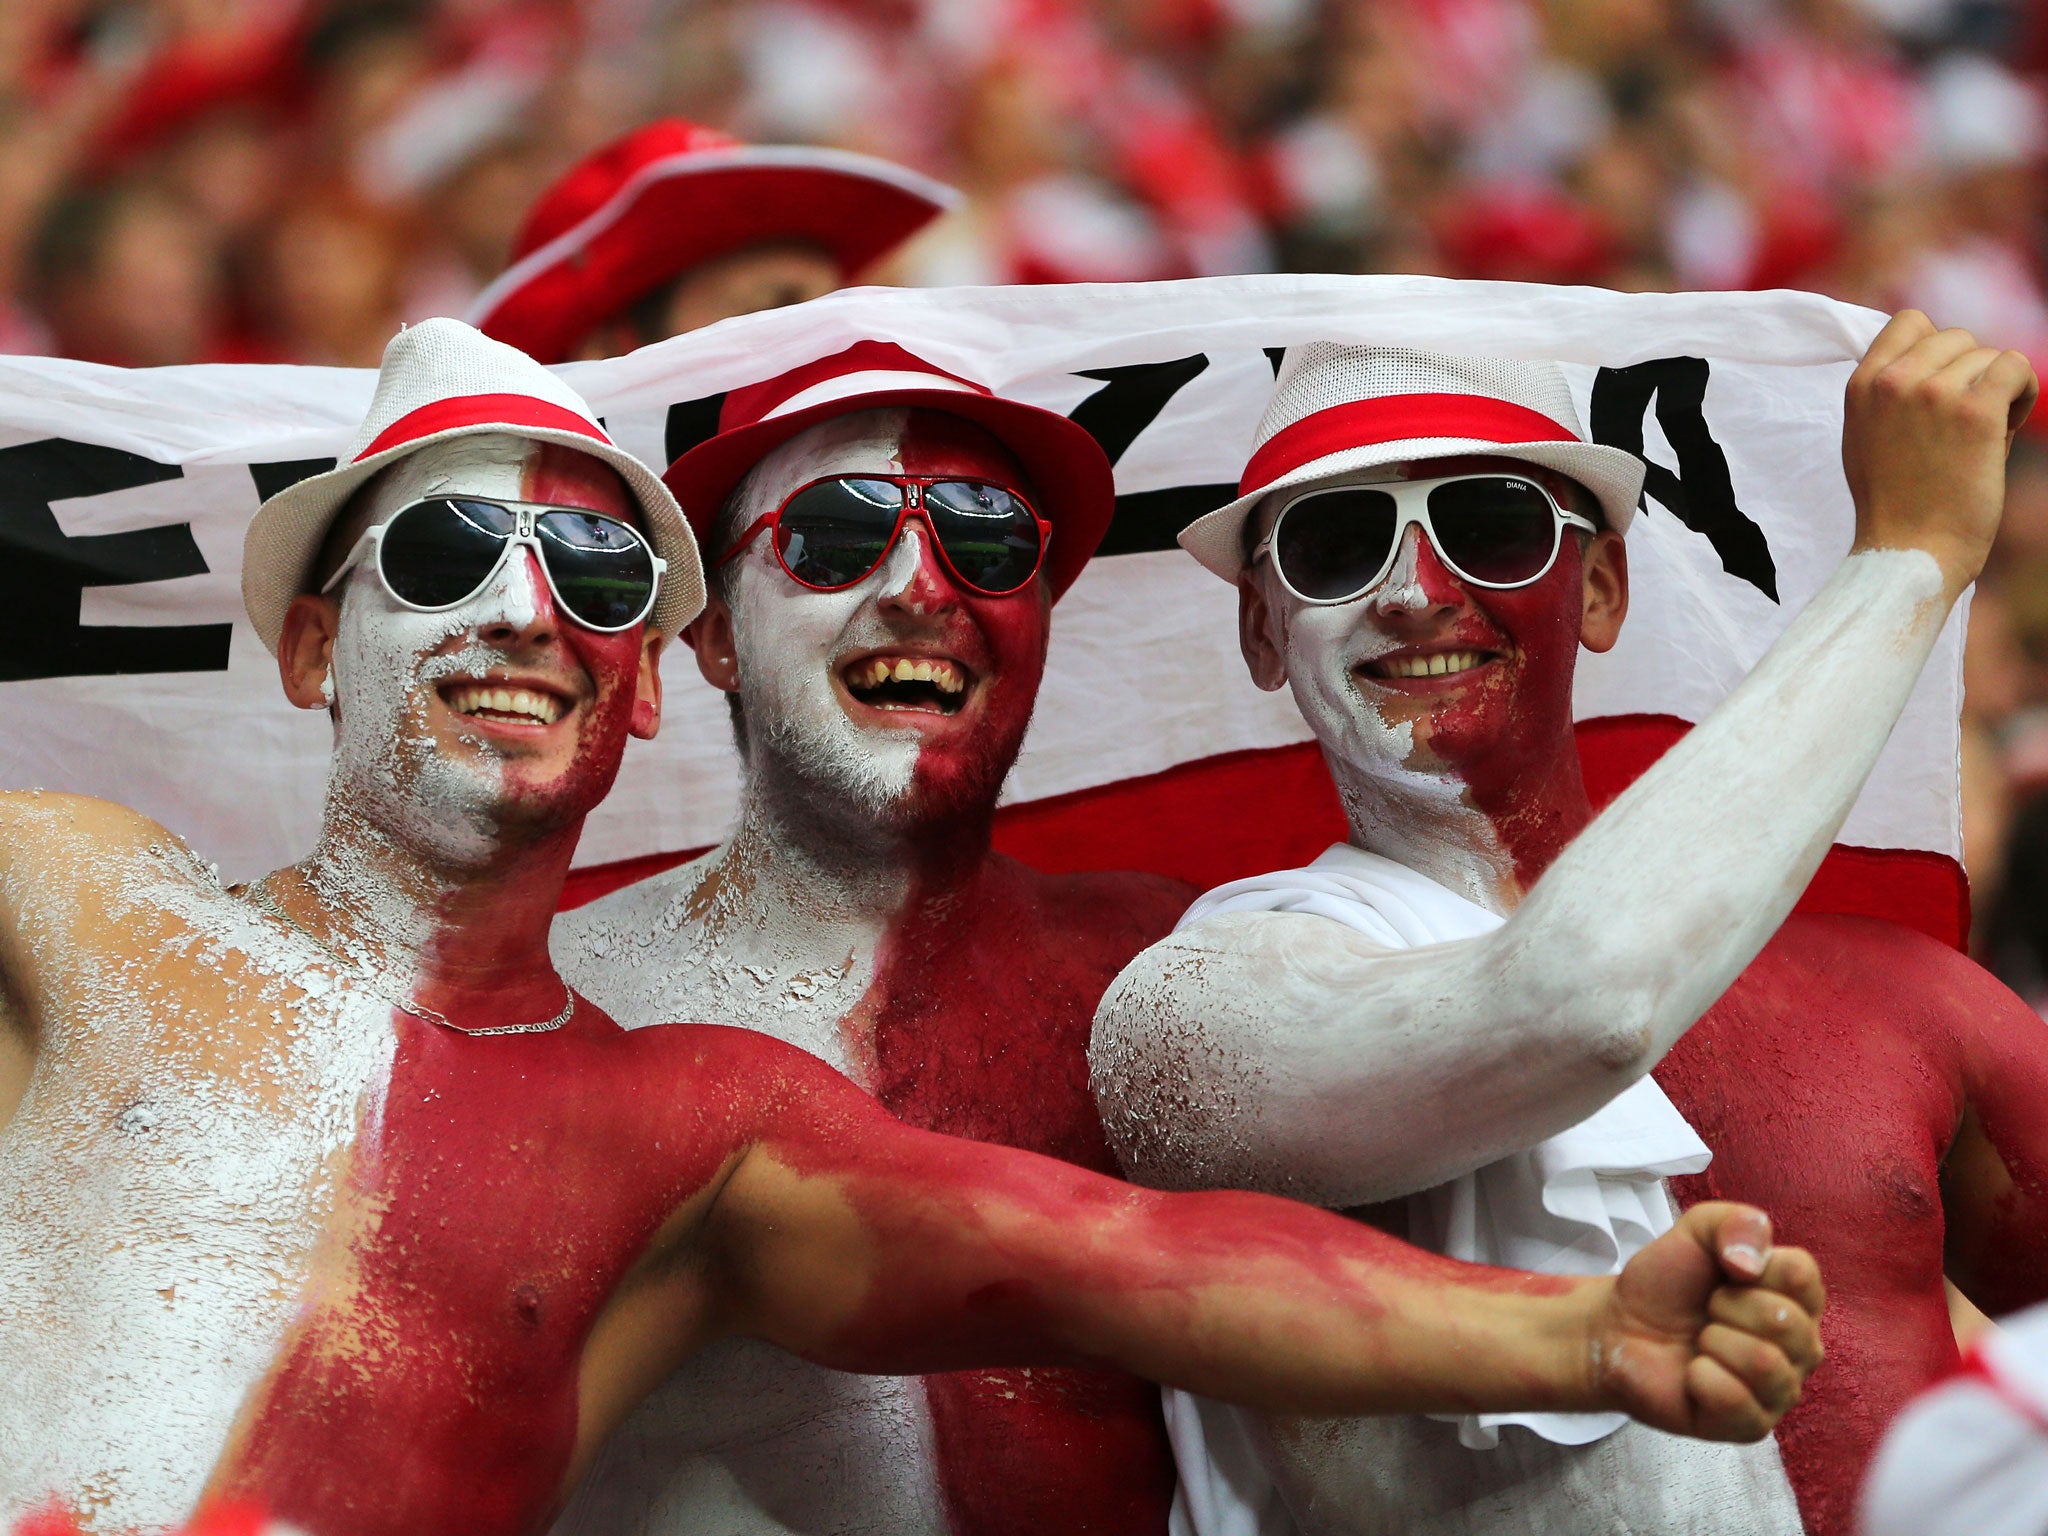 Polish fans will aim to paint the town red at Wembley